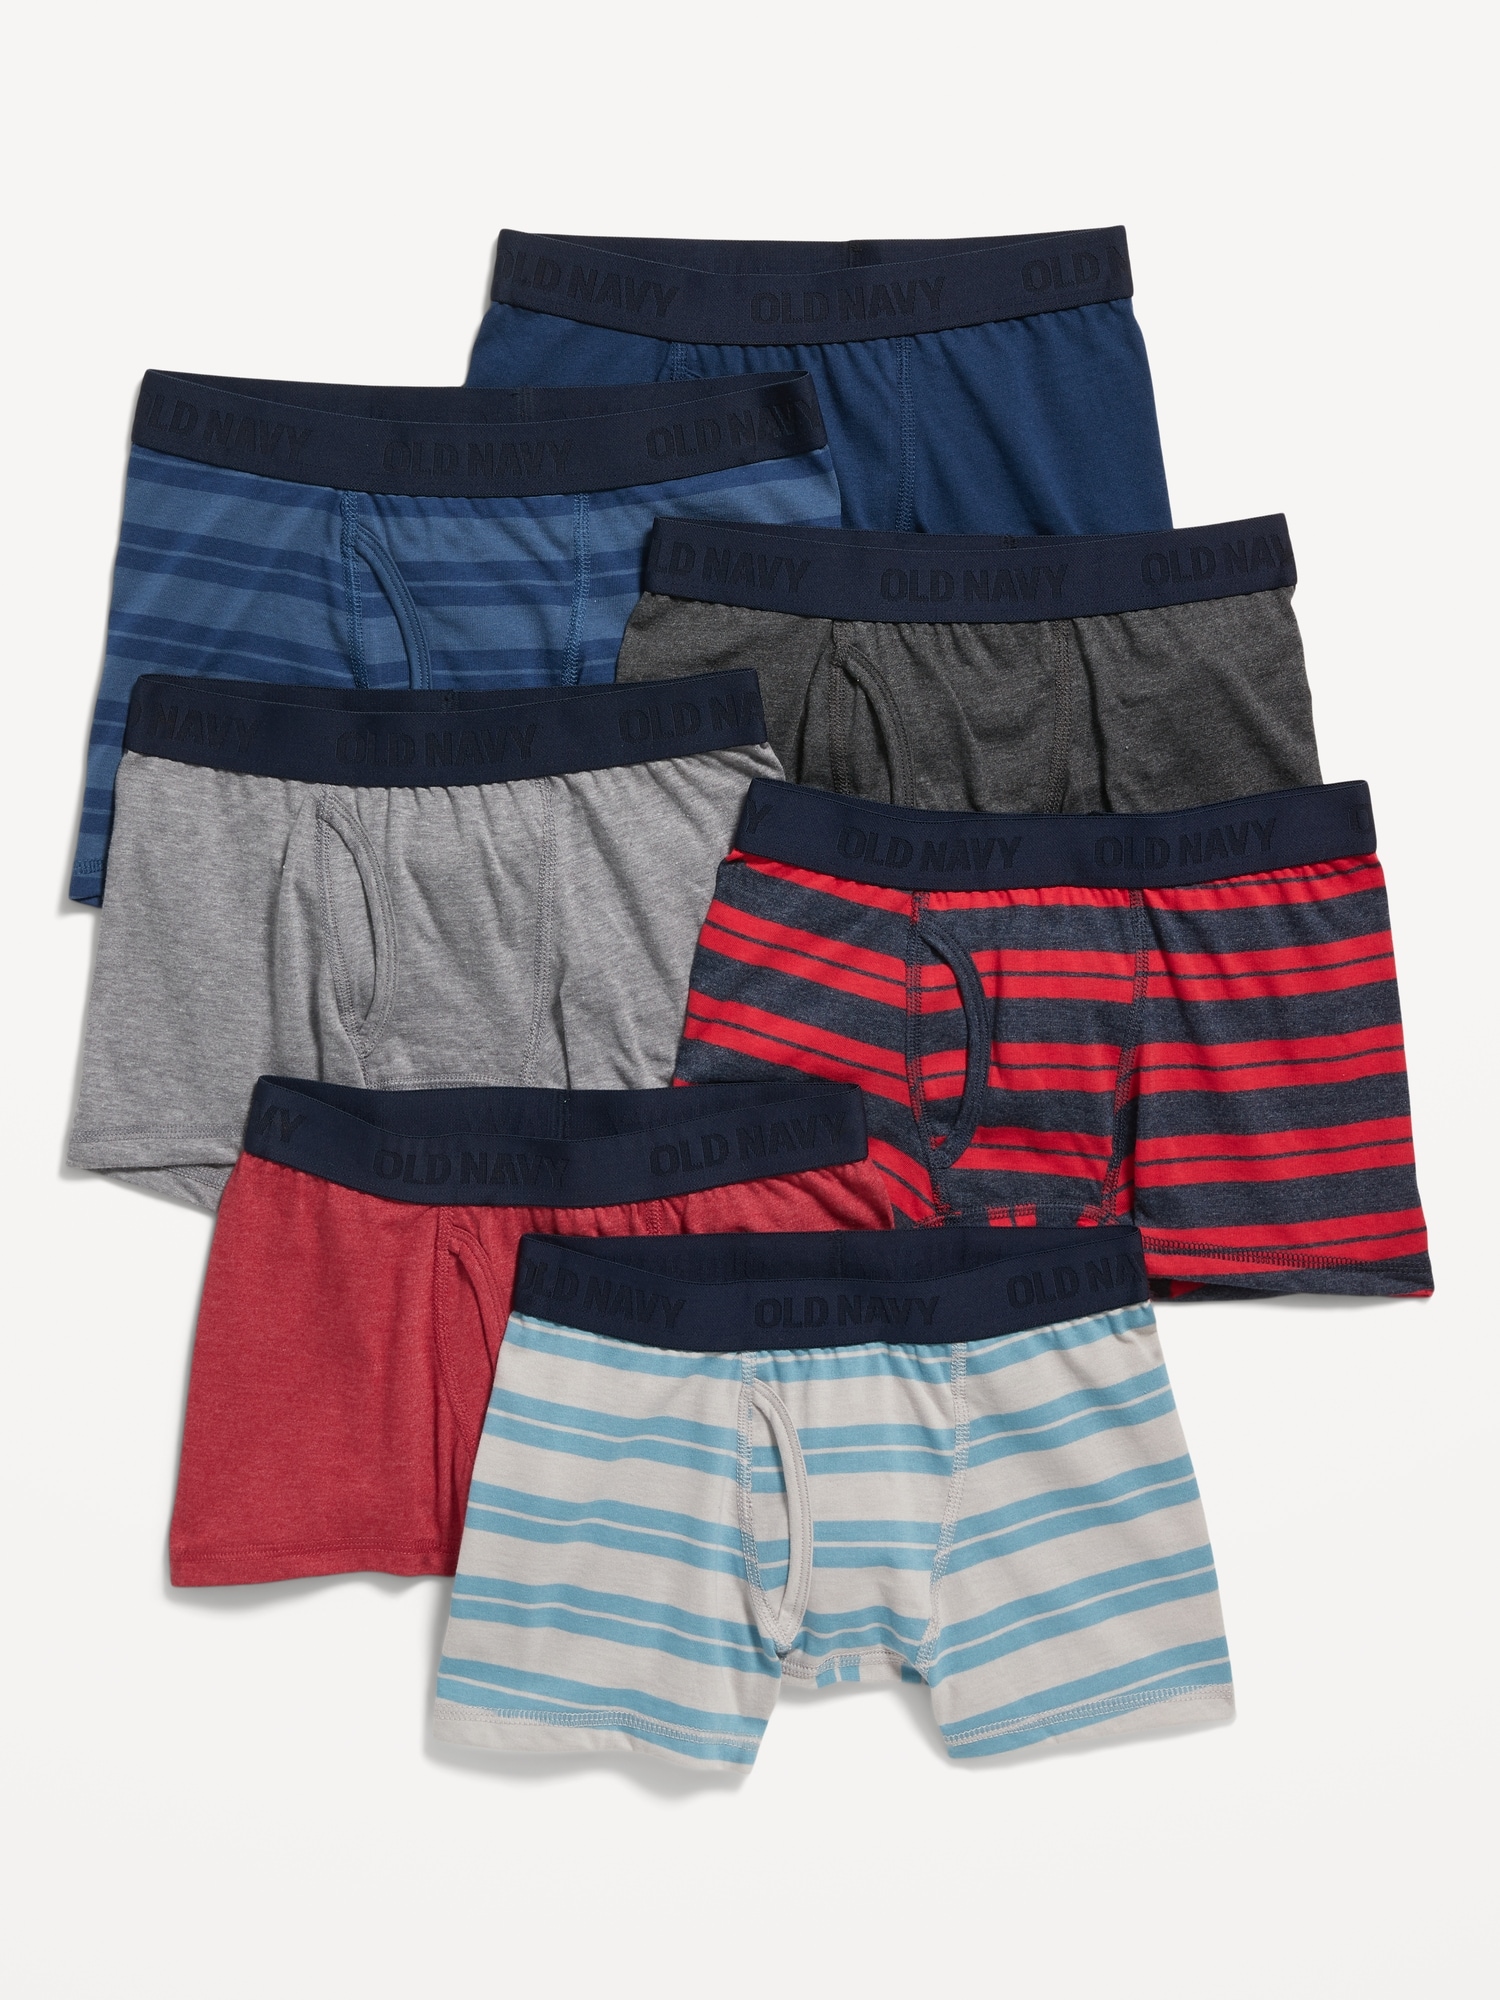 Old Navy Printed Boxer-Briefs Underwear 7-Pack for Boys red. 1